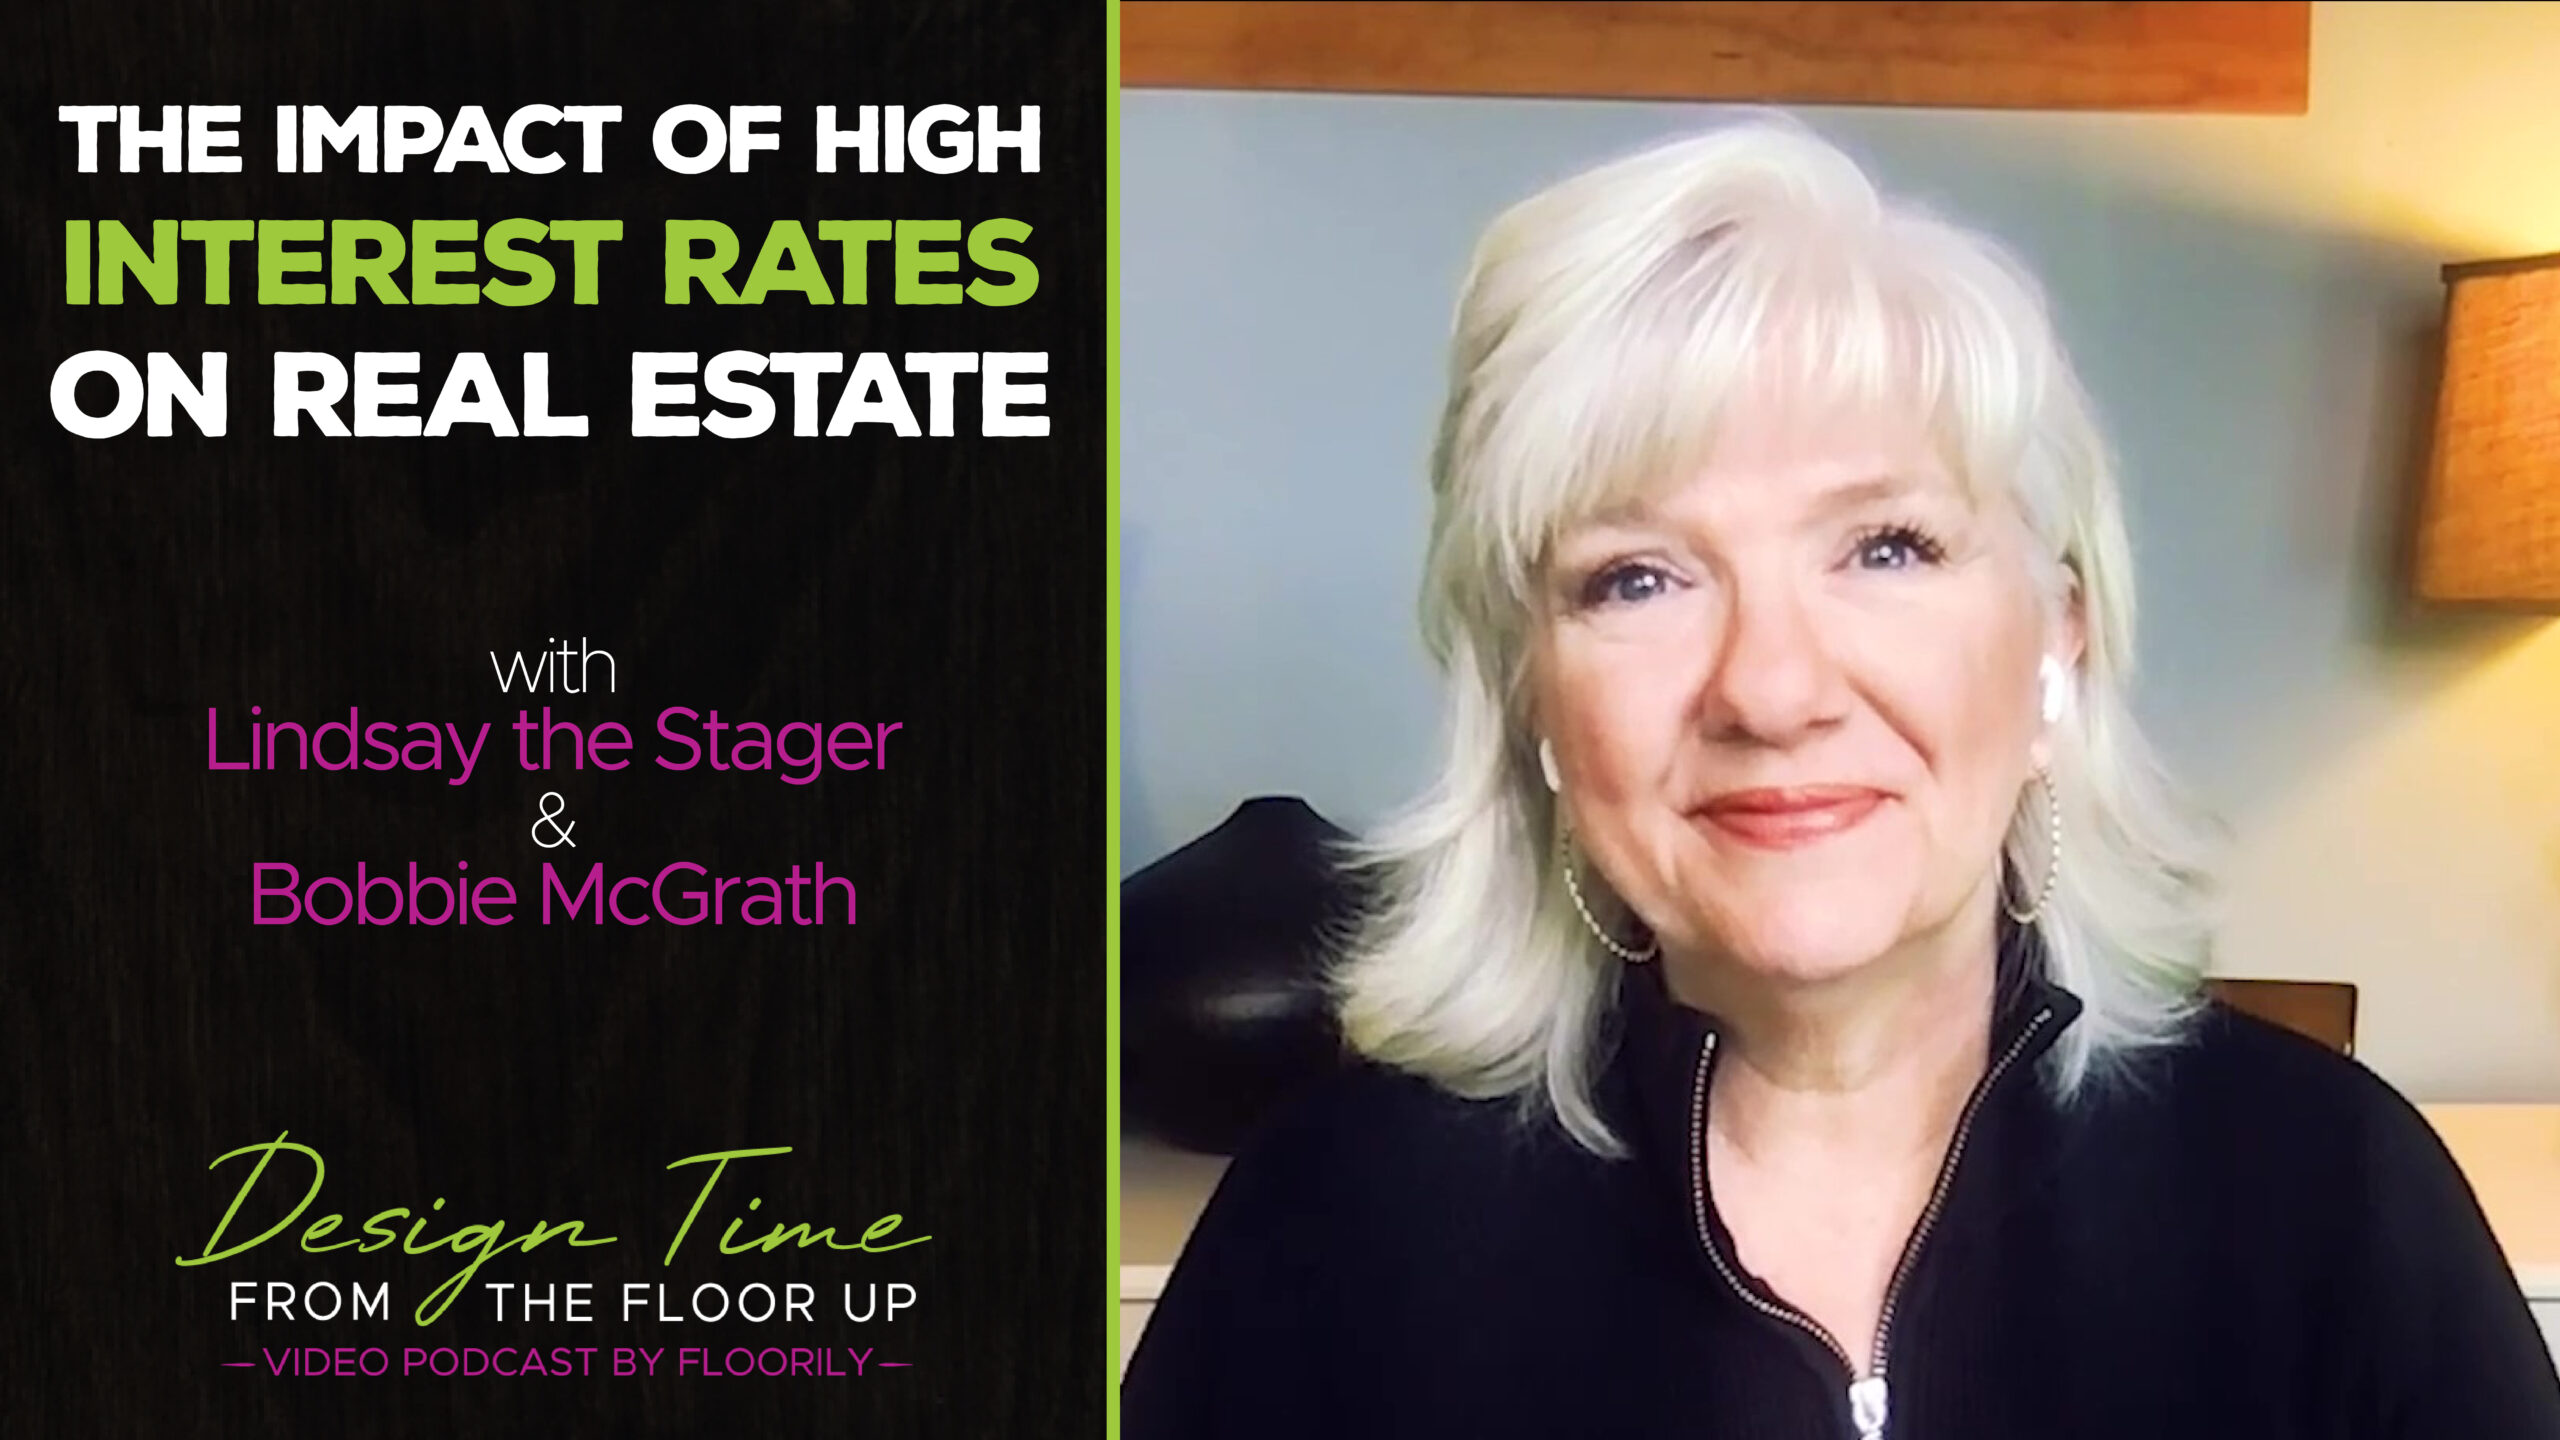 The Impact of High Interest Rates on Real Estate Floorily